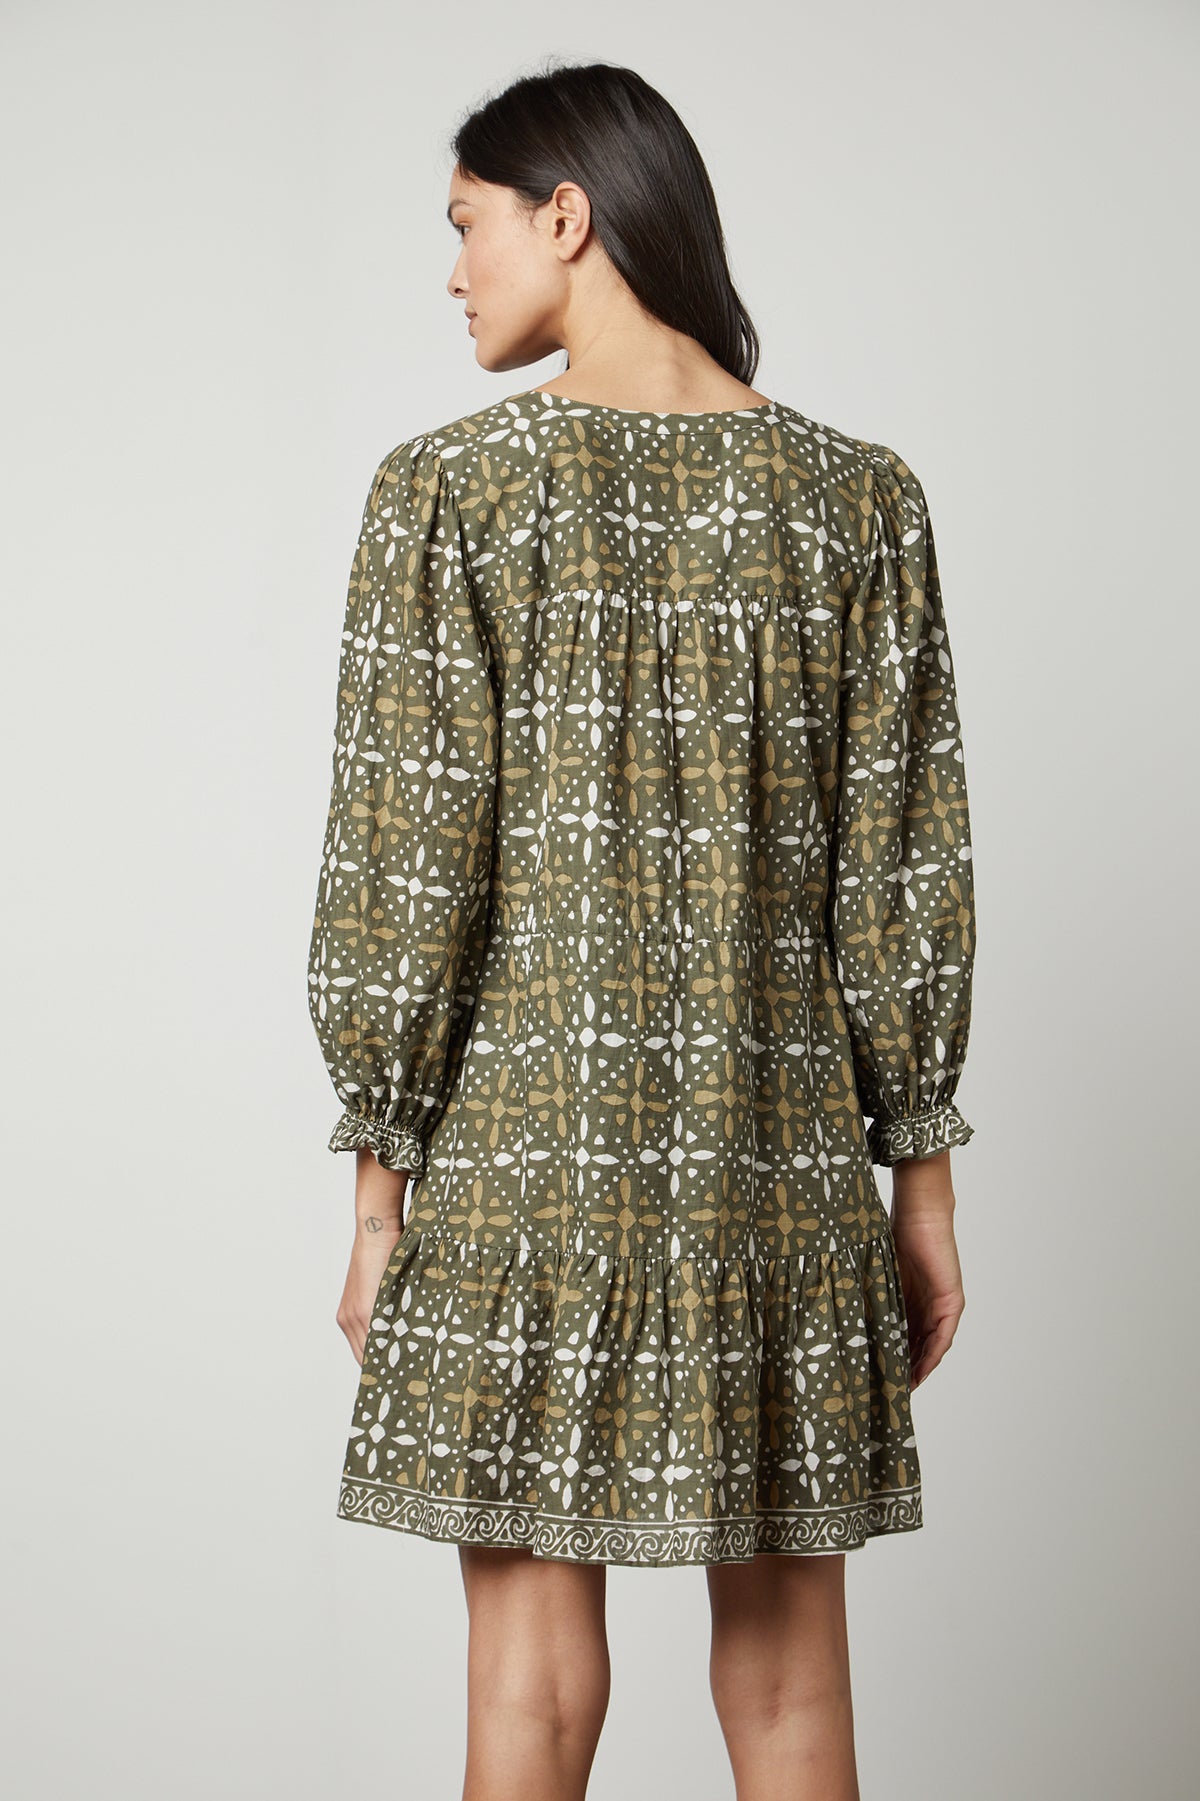 The back view of a woman wearing a Velvet by Graham & Spencer KATARINA PRINTED BOHO DRESS.-26799892005057